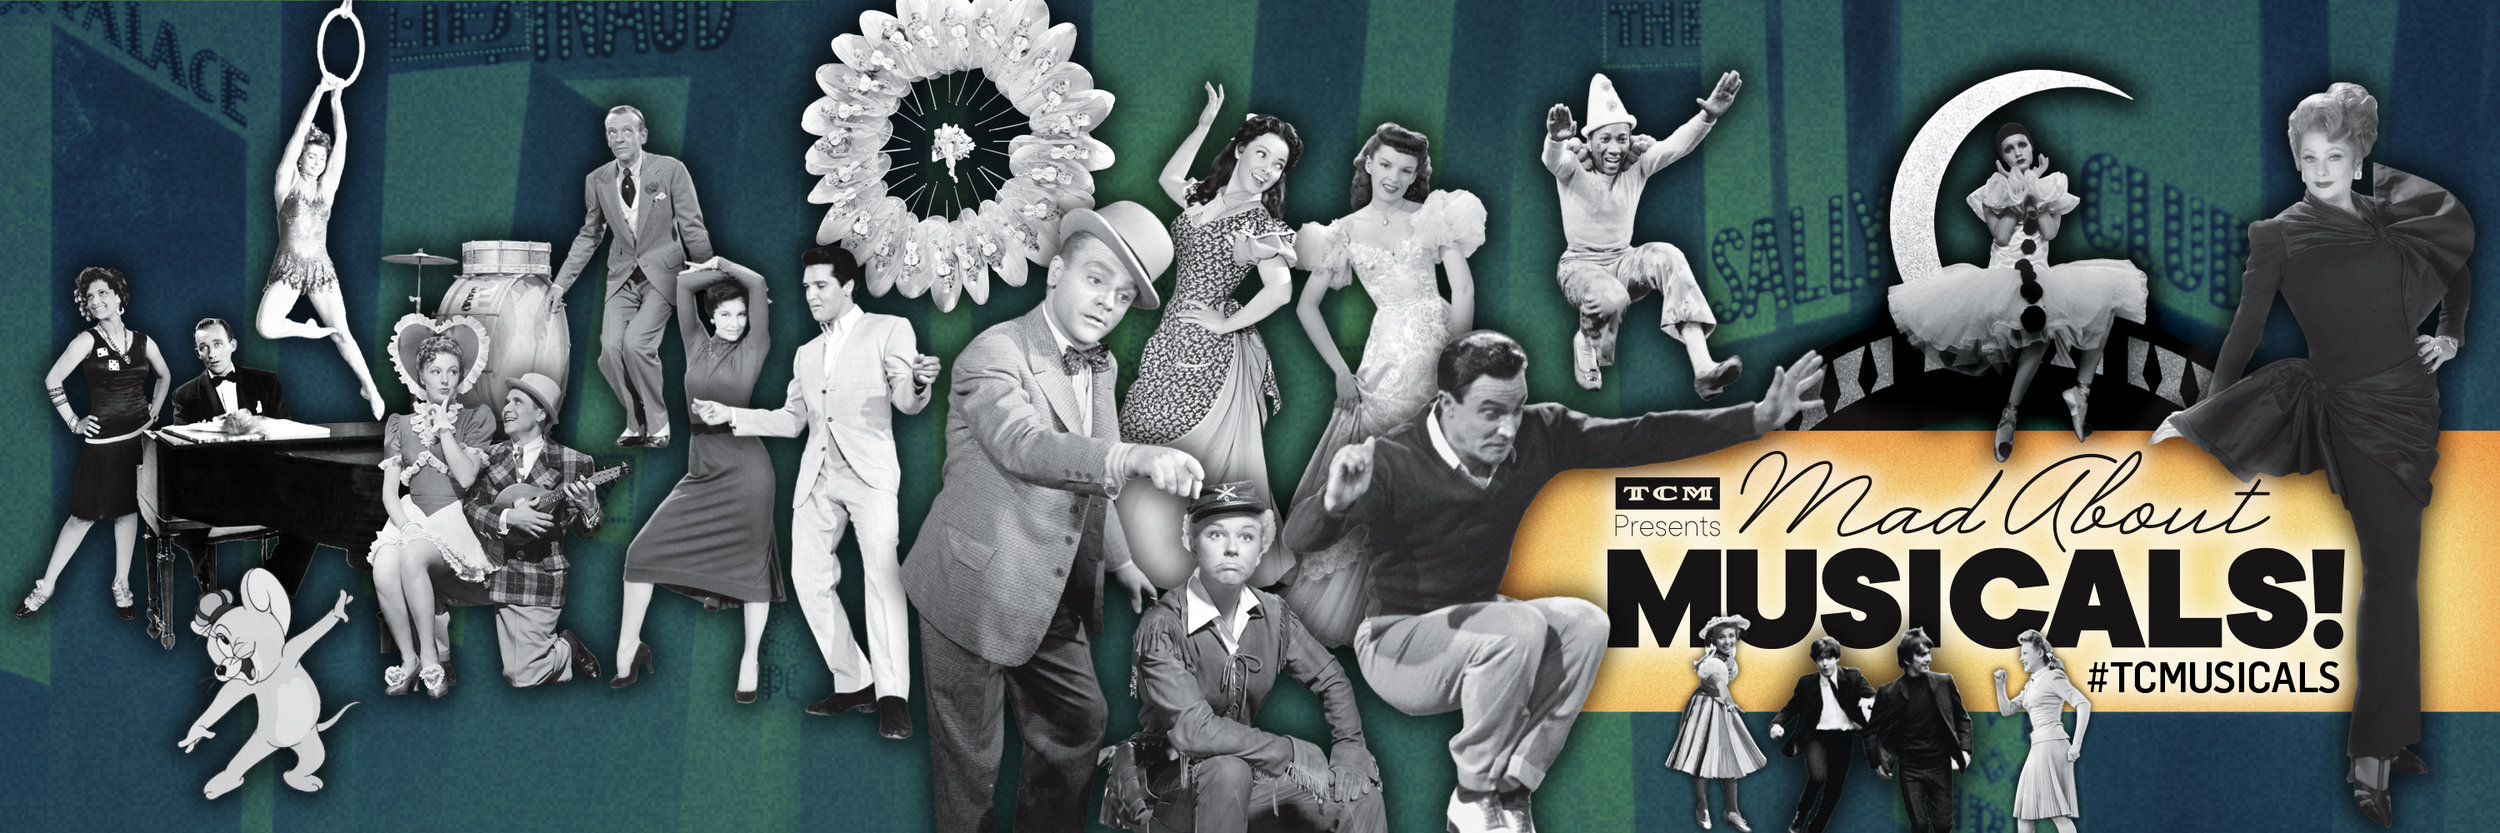 TCM_SocialCovers_18-06_MadAboutMusicals_Concepts_RD3-A.jpg